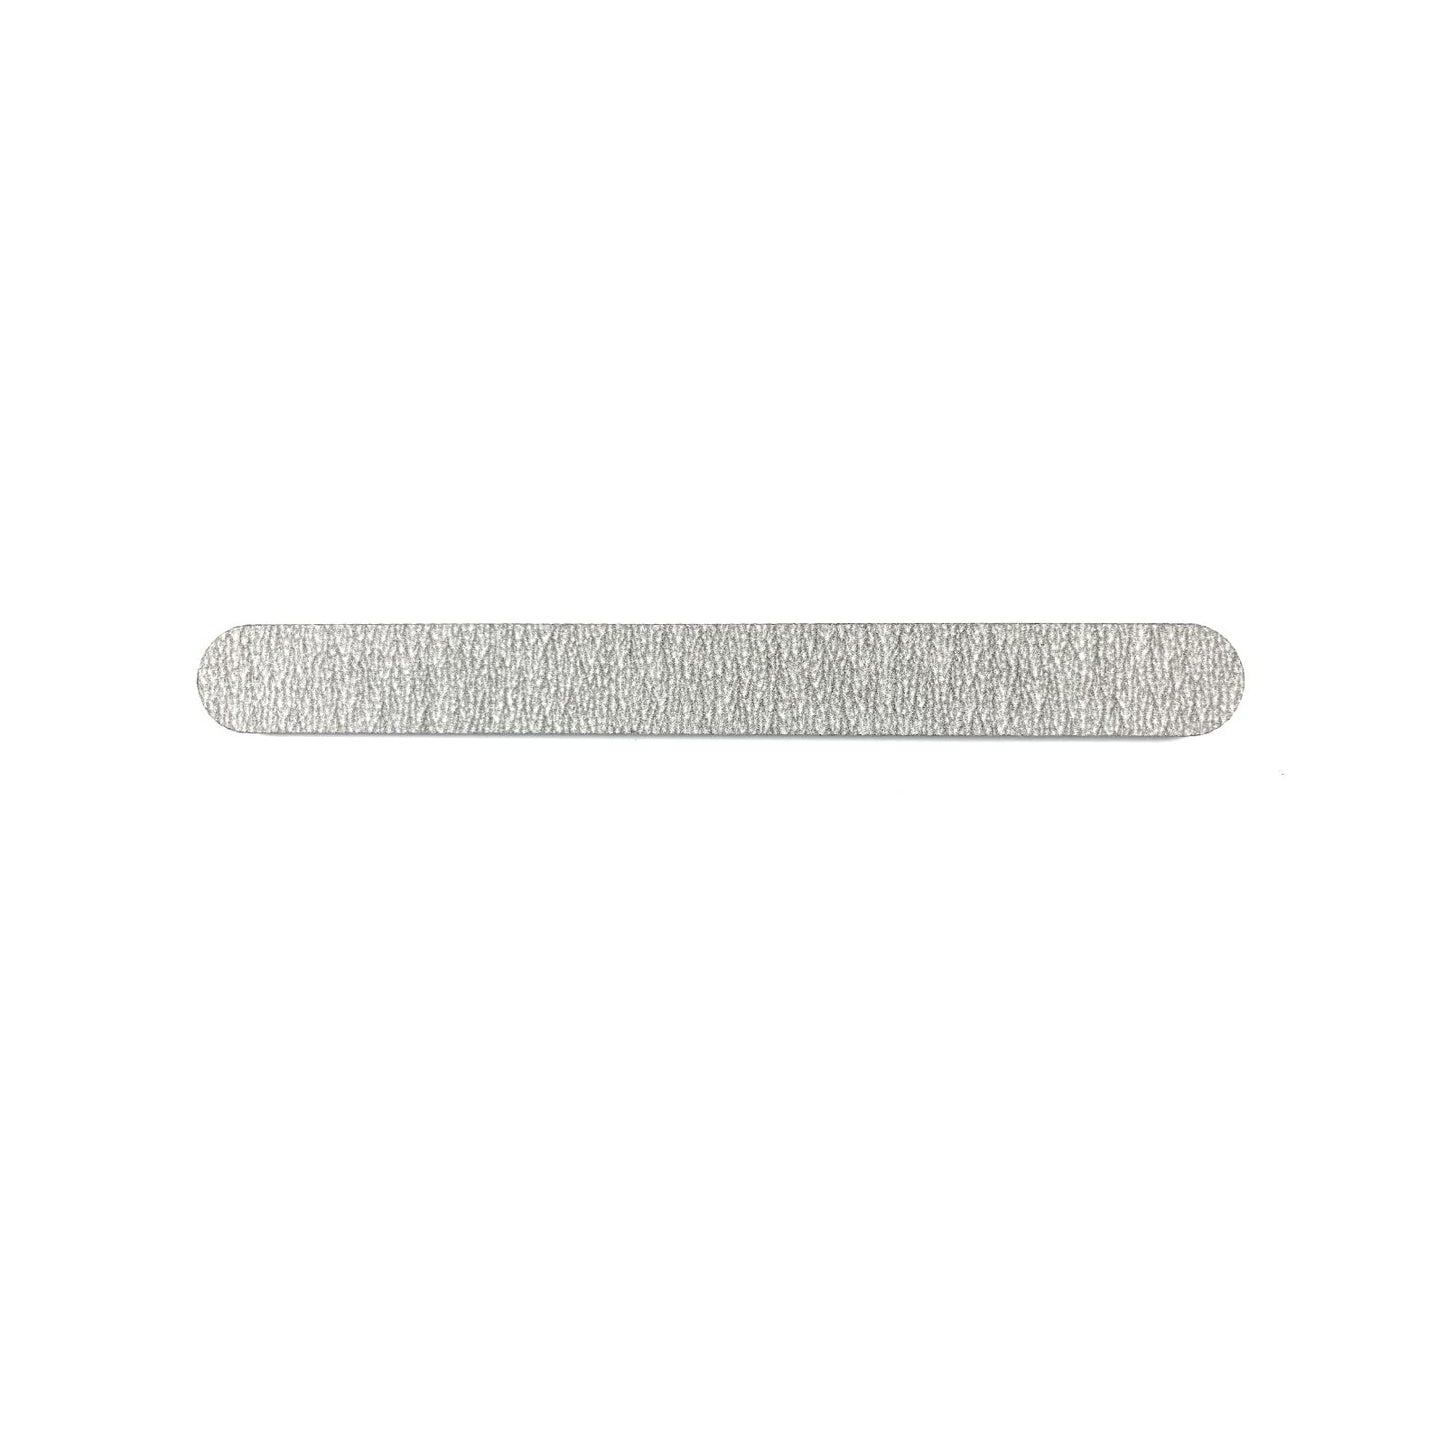 Soft Touch Nail File, 180 Grit, Medium, Zebra Cushion, for Natural and Artificial Nails, 7 Inch - 5 Pieces